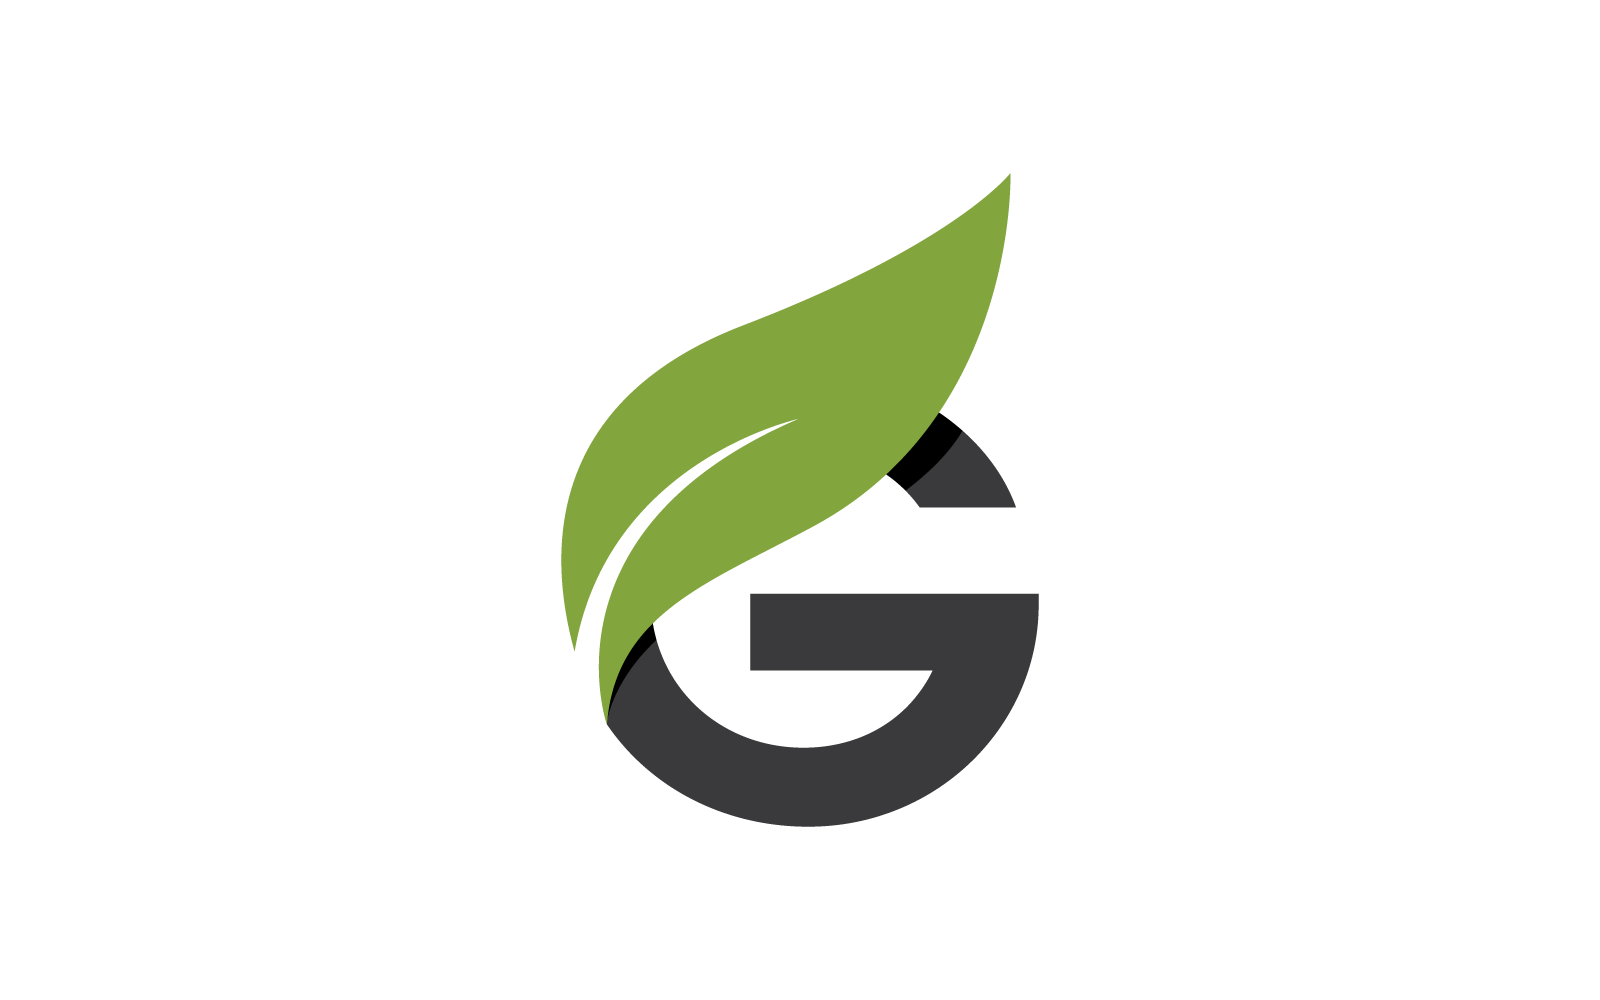 G Initial letter with green leaf logo vector flat design